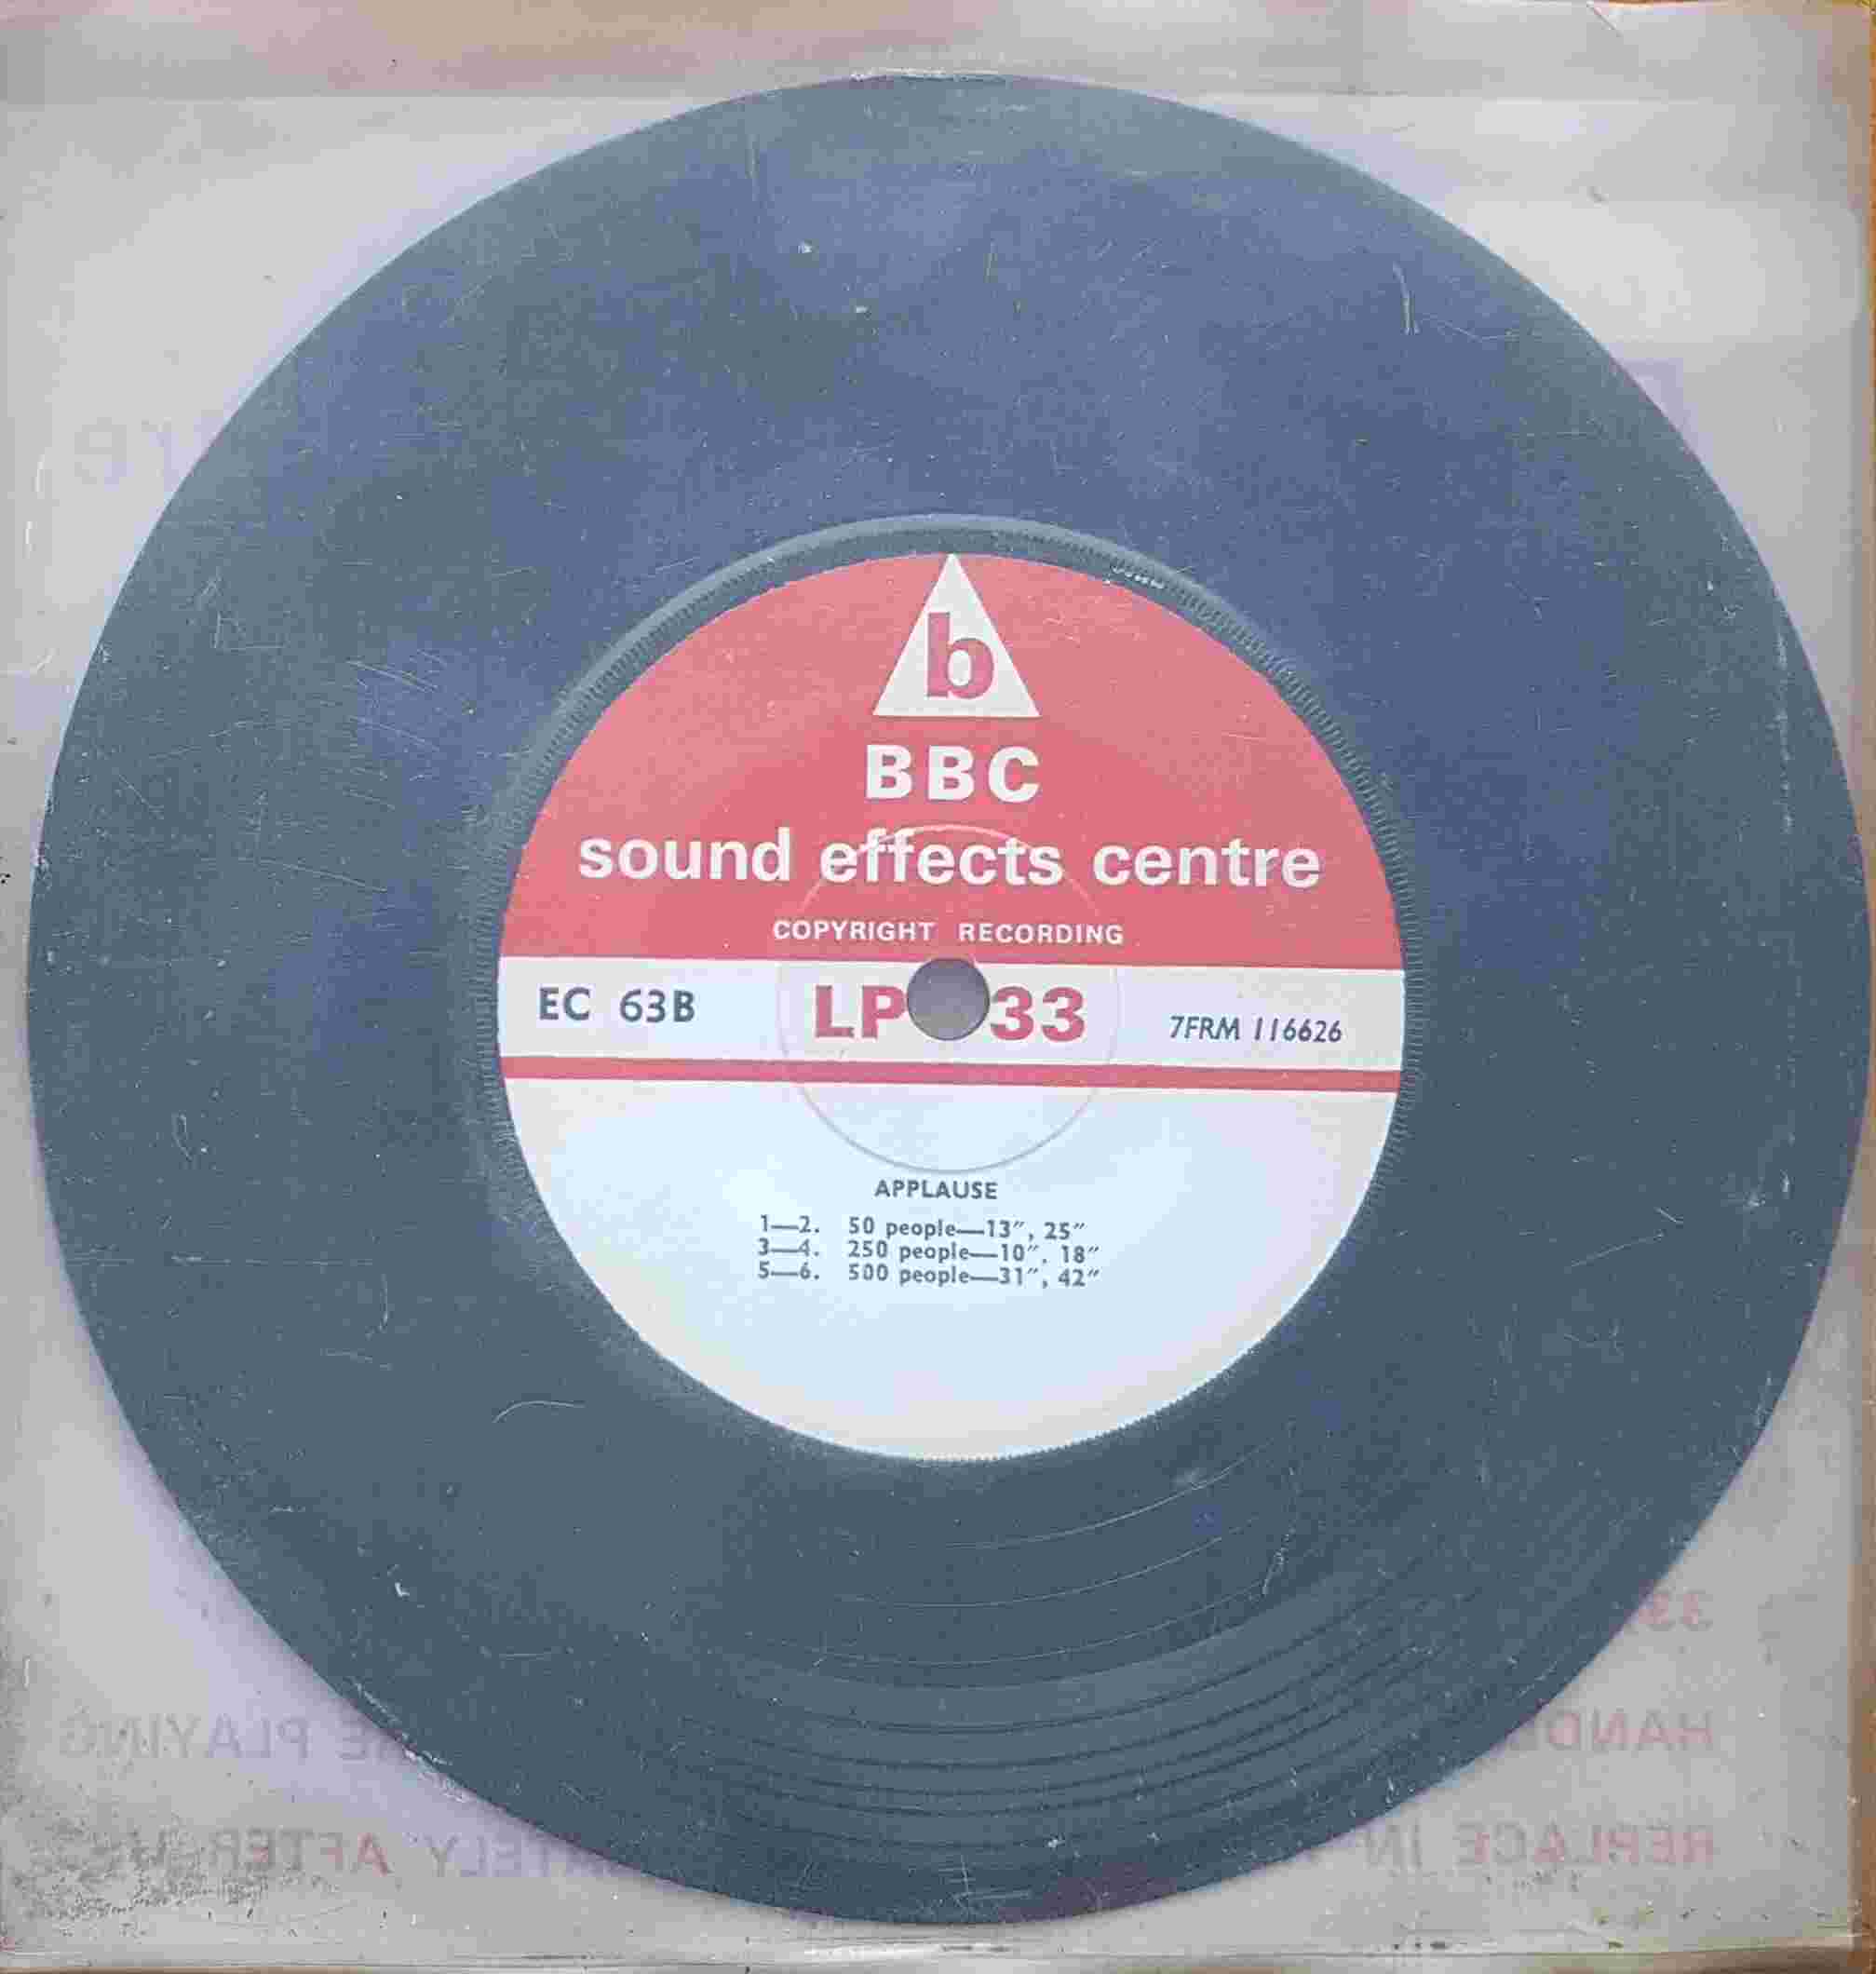 Picture of EC 63B Applause at concert by artist Not registered from the BBC records and Tapes library